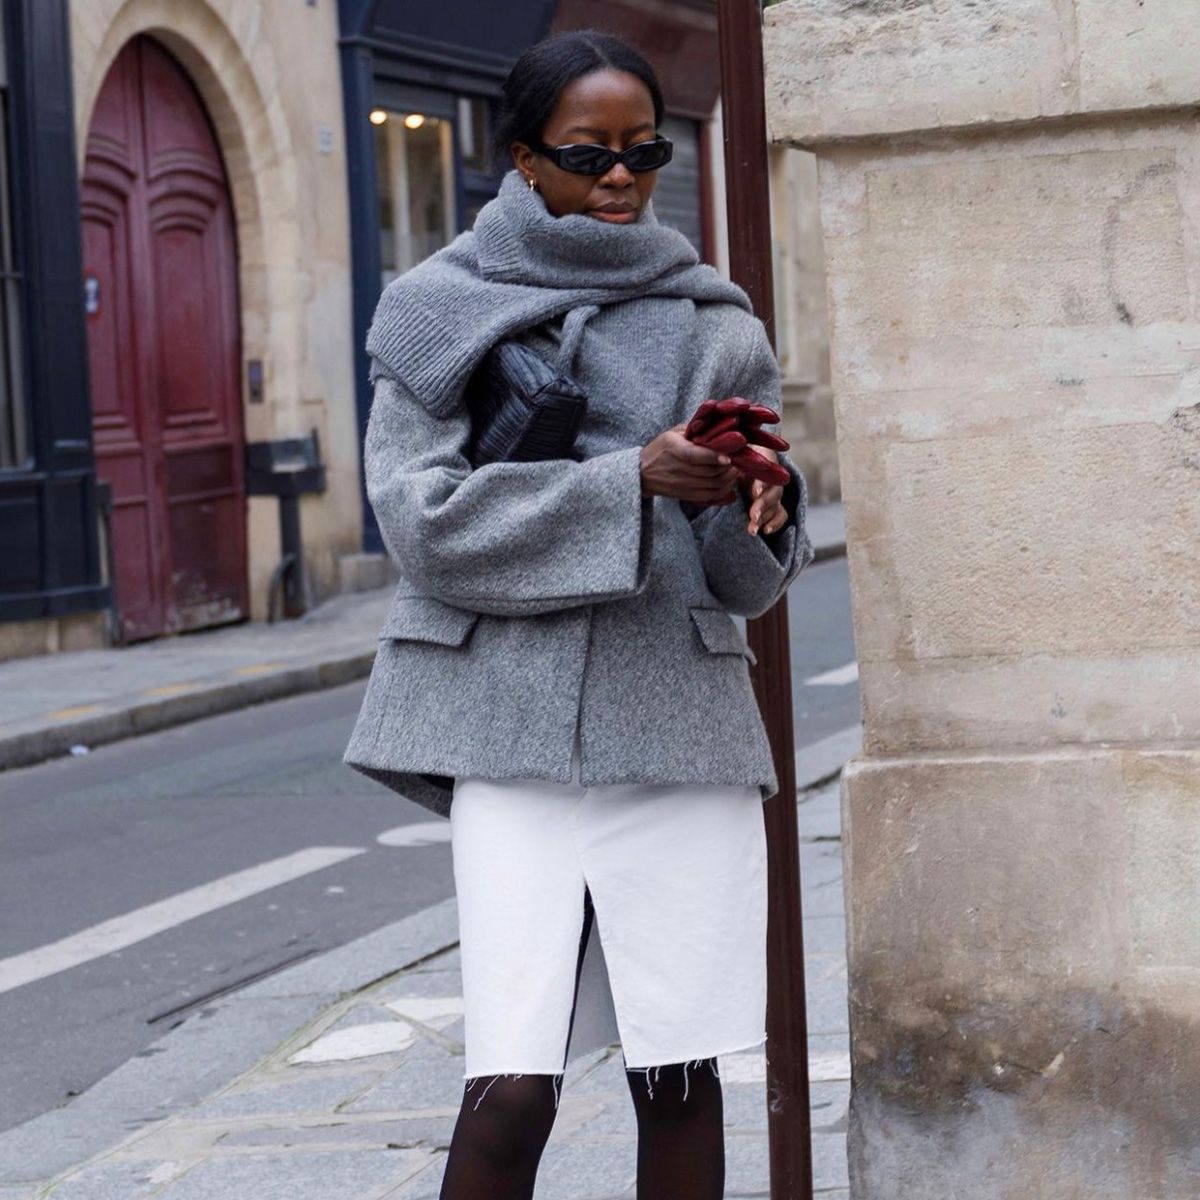 The Four Winter Fashion Trends That Dominated the Street-Style